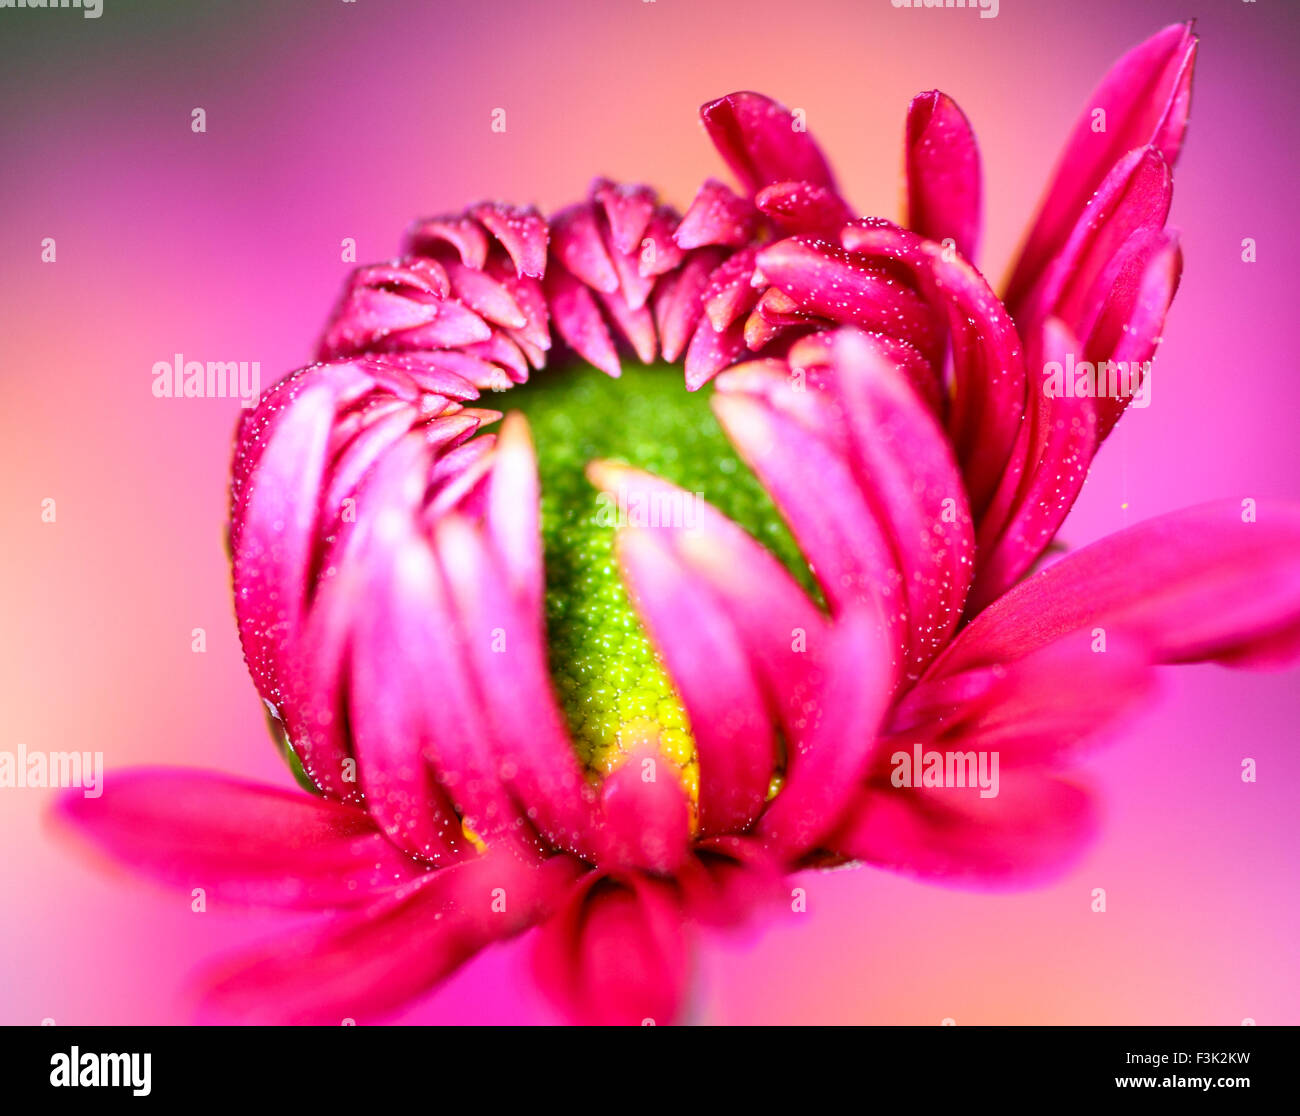 Leeds, UK. 08th Oct, 2015. After a week of wet weather the sun finally shone today highlighting the beautiful autumnal colours at Golden Acre park near Leeds, West Yorkshire.The large display of chrysanthemum flowers looked particularly vibrant. Taken on the 8th October 2015. Credit:  Andrew Gardner/Alamy Live News Stock Photo